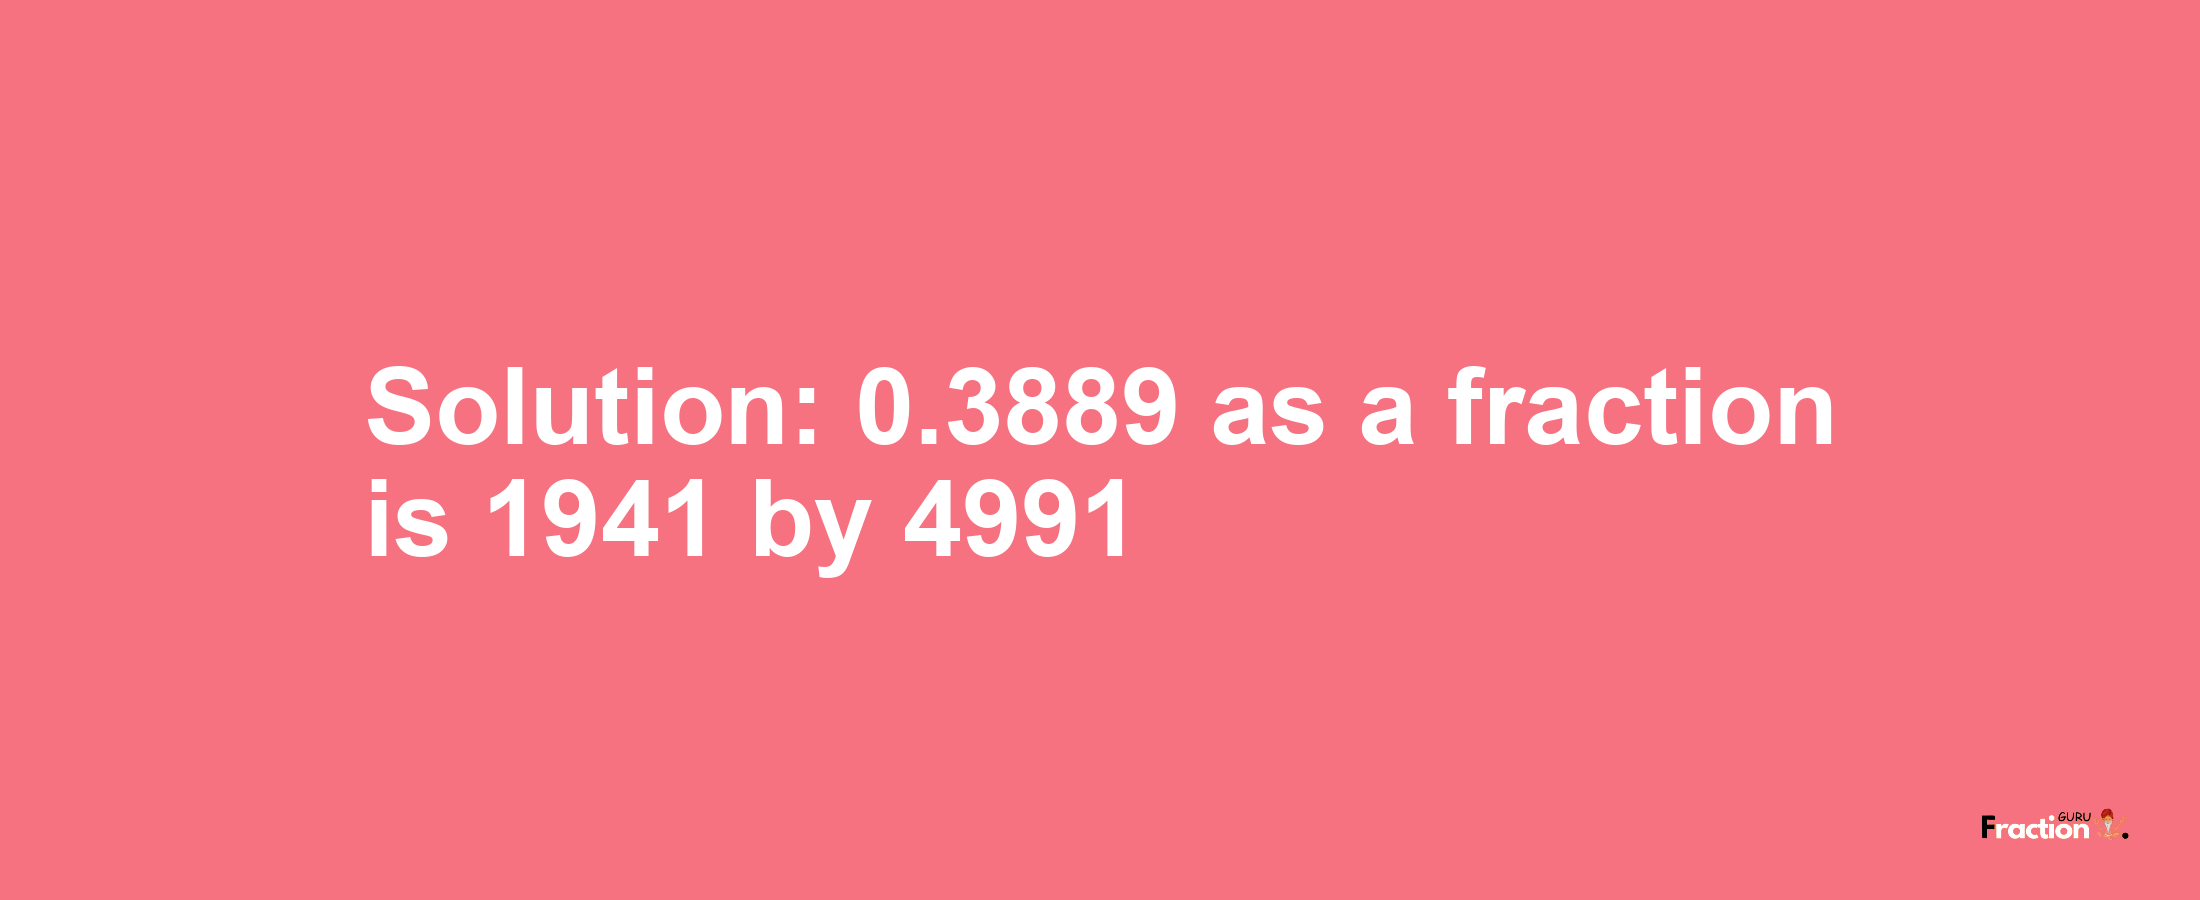 Solution:0.3889 as a fraction is 1941/4991